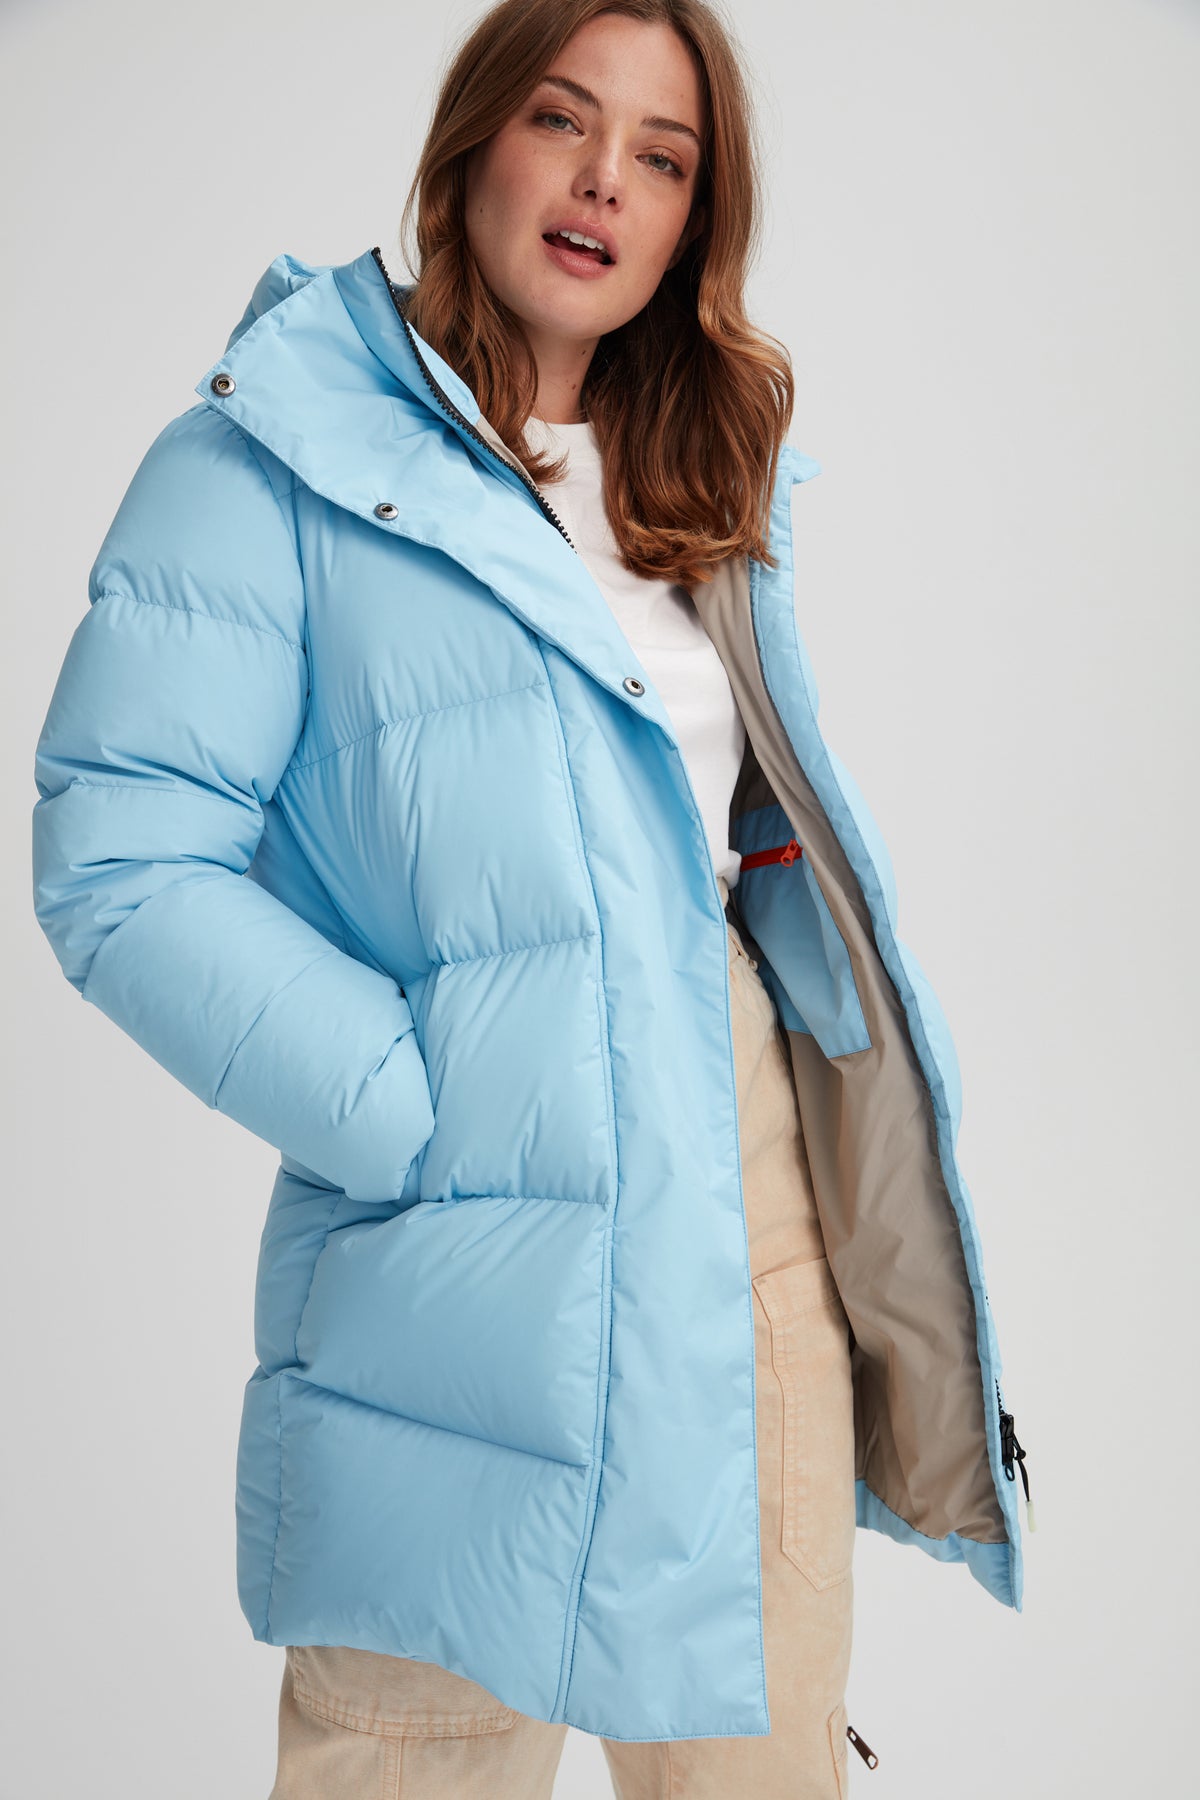 How to choose your winter coat to stay warm – Fosfo Puffer